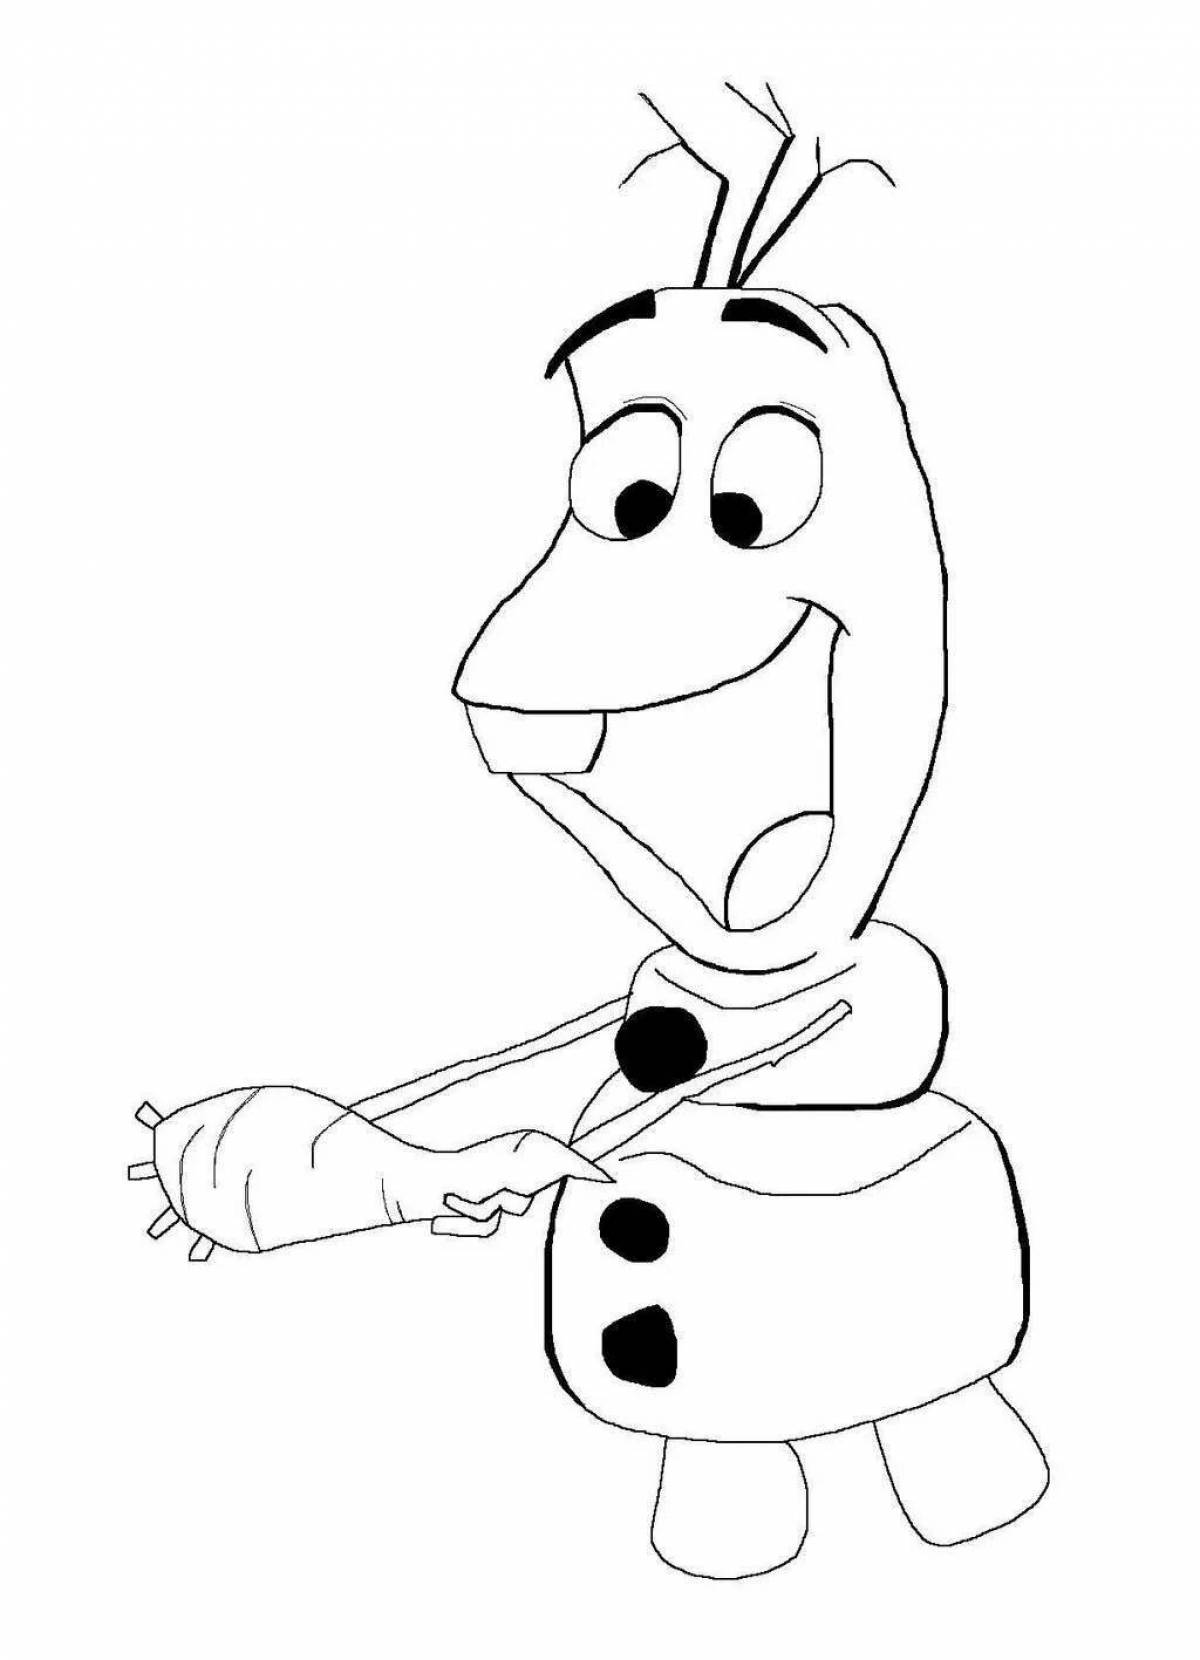 Olaf creative coloring for kids